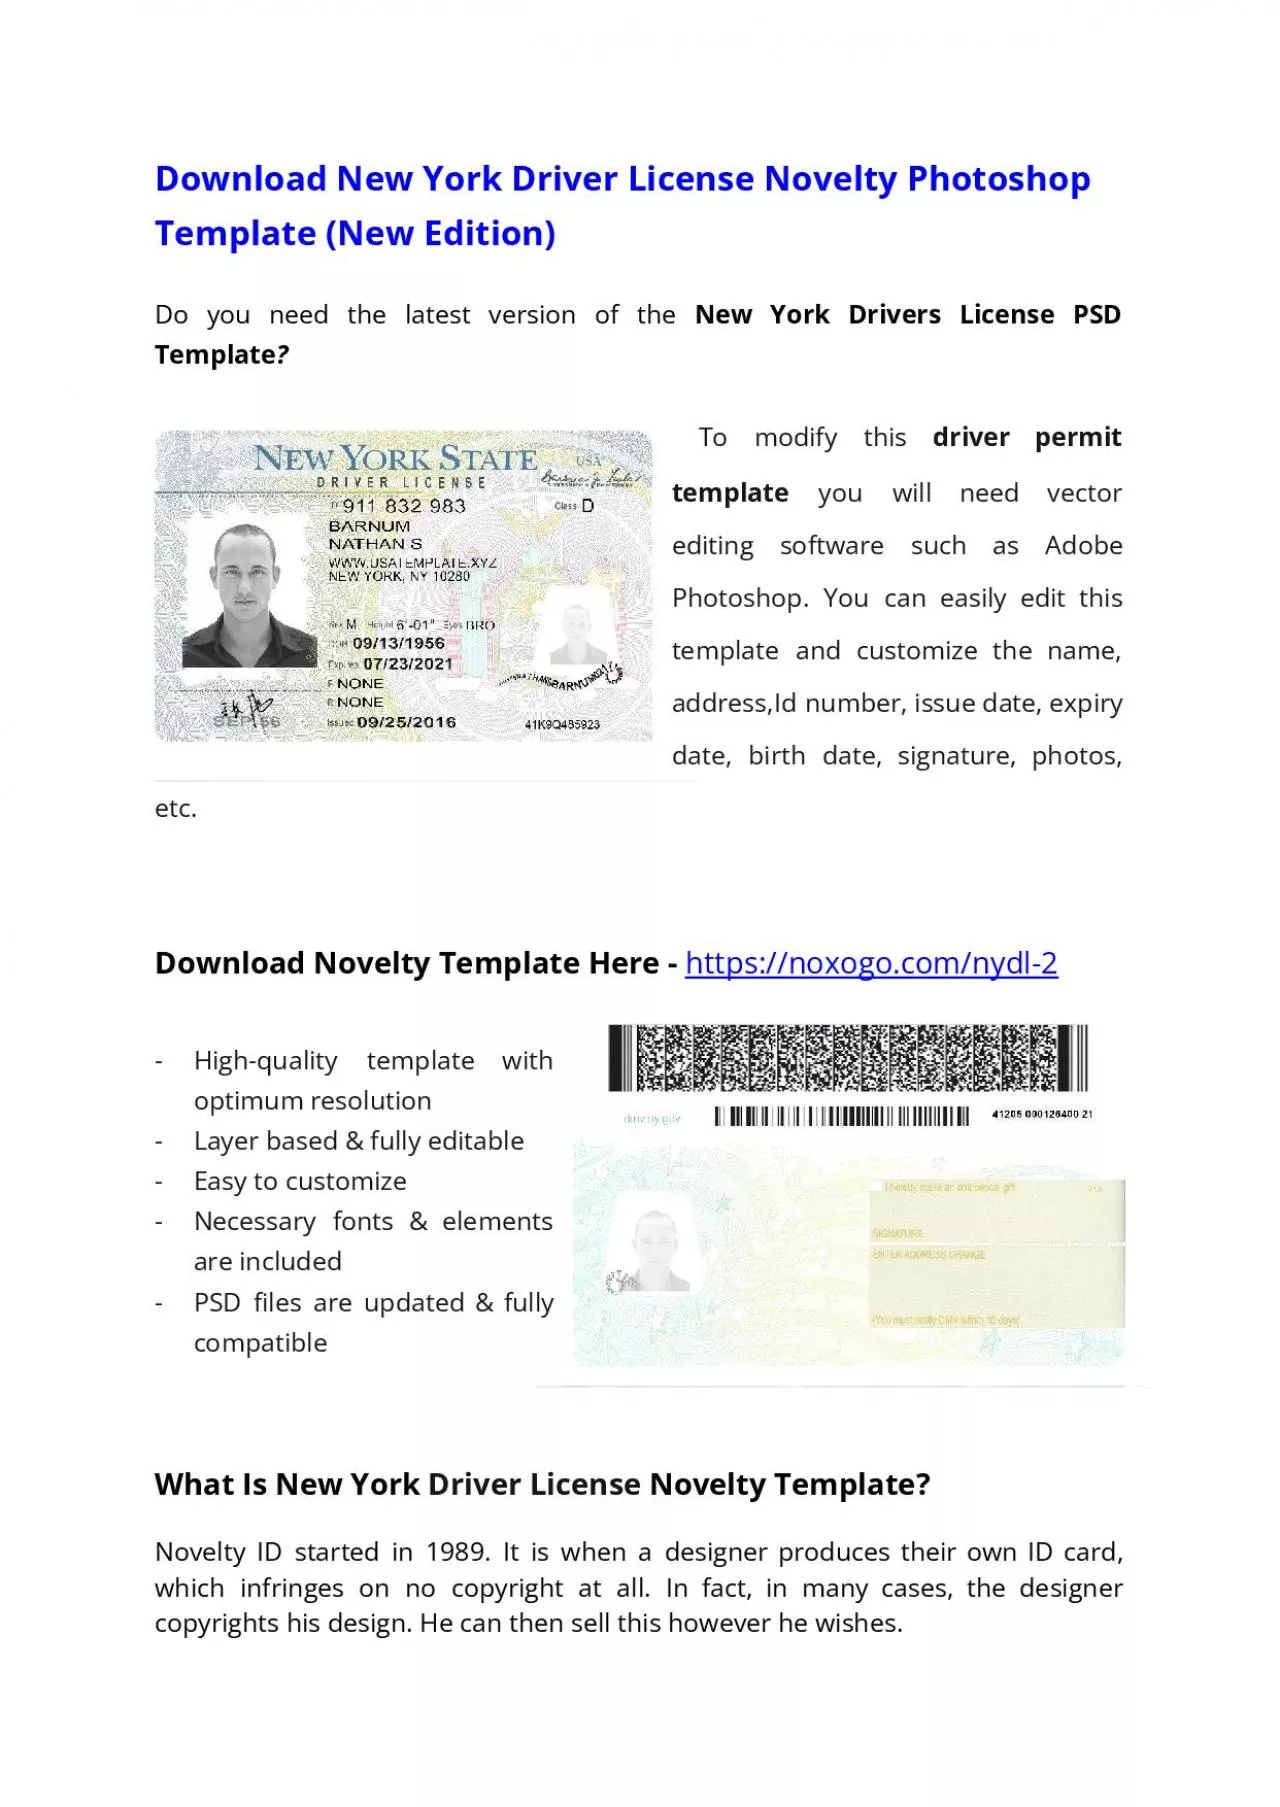 New York Drivers License PSD Template (New Edition) – Download Photoshop File